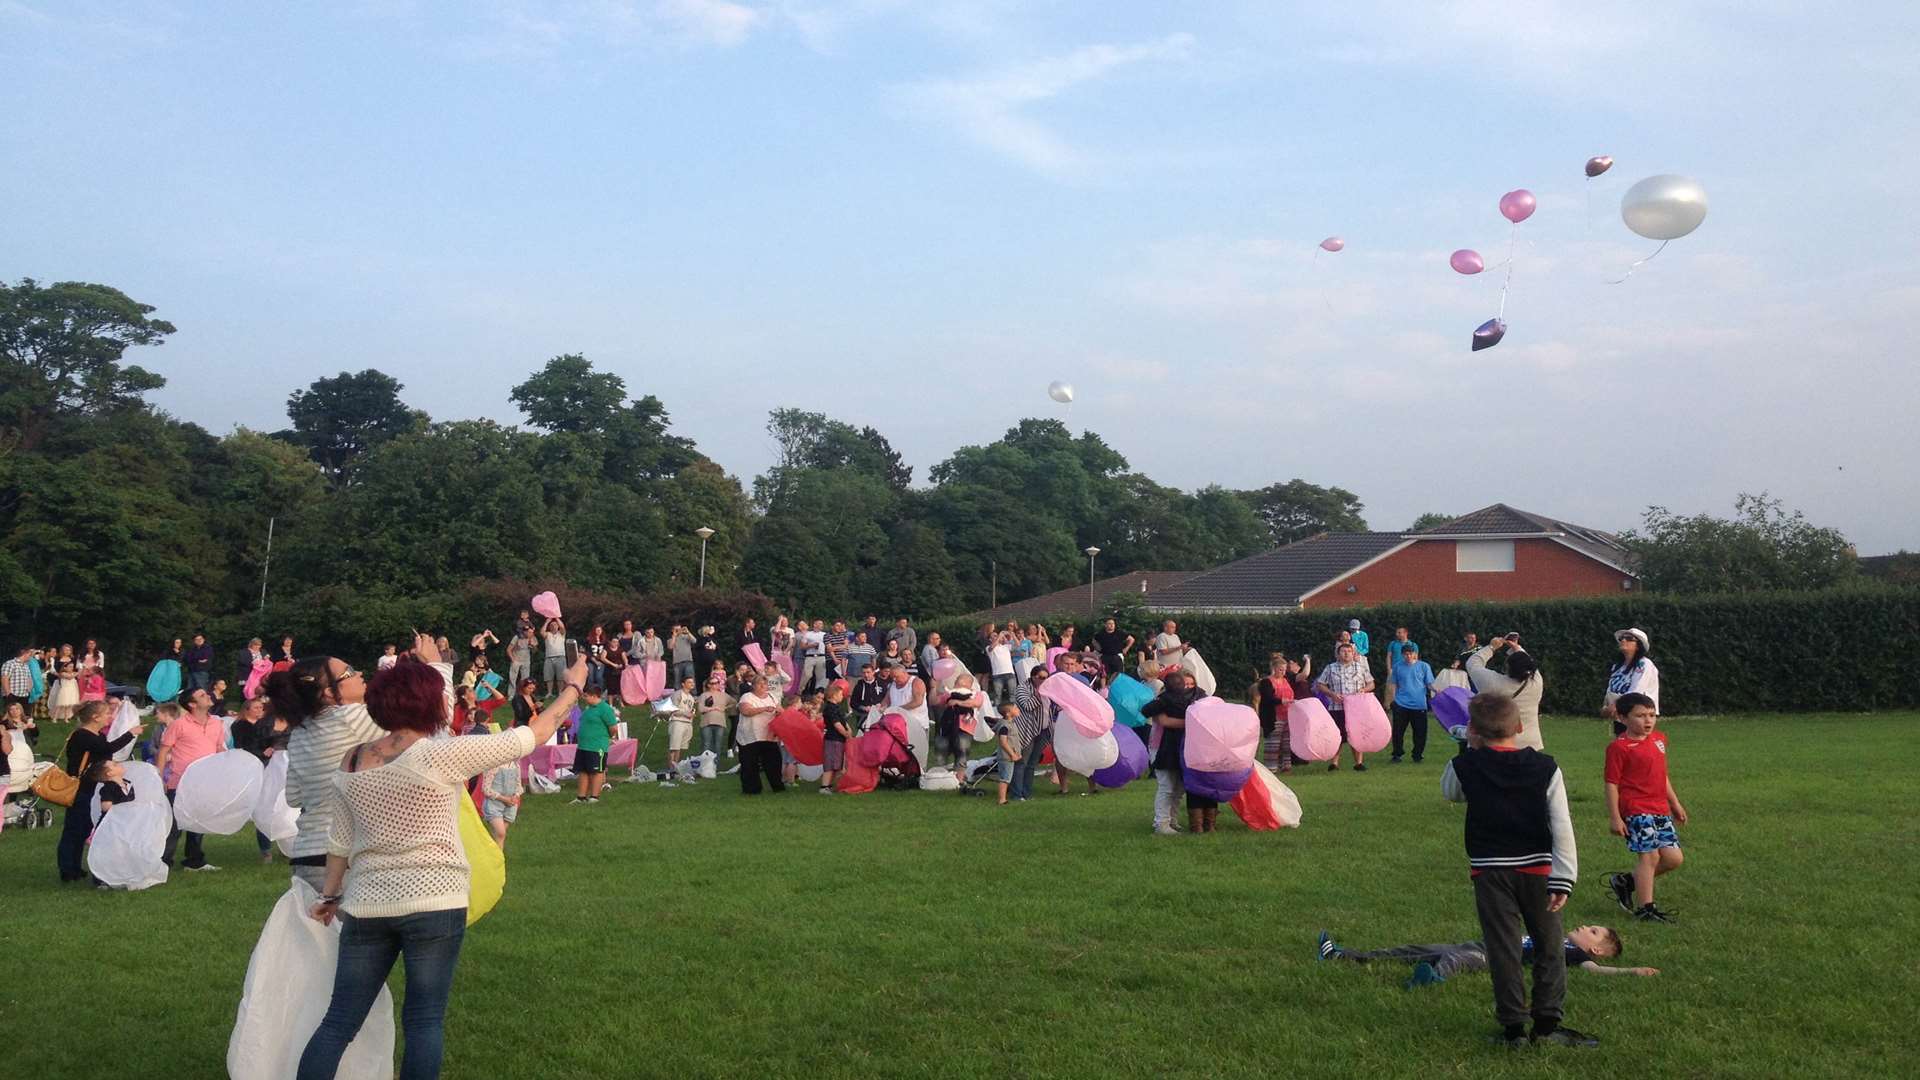 Jade's friends and family released pink balloons